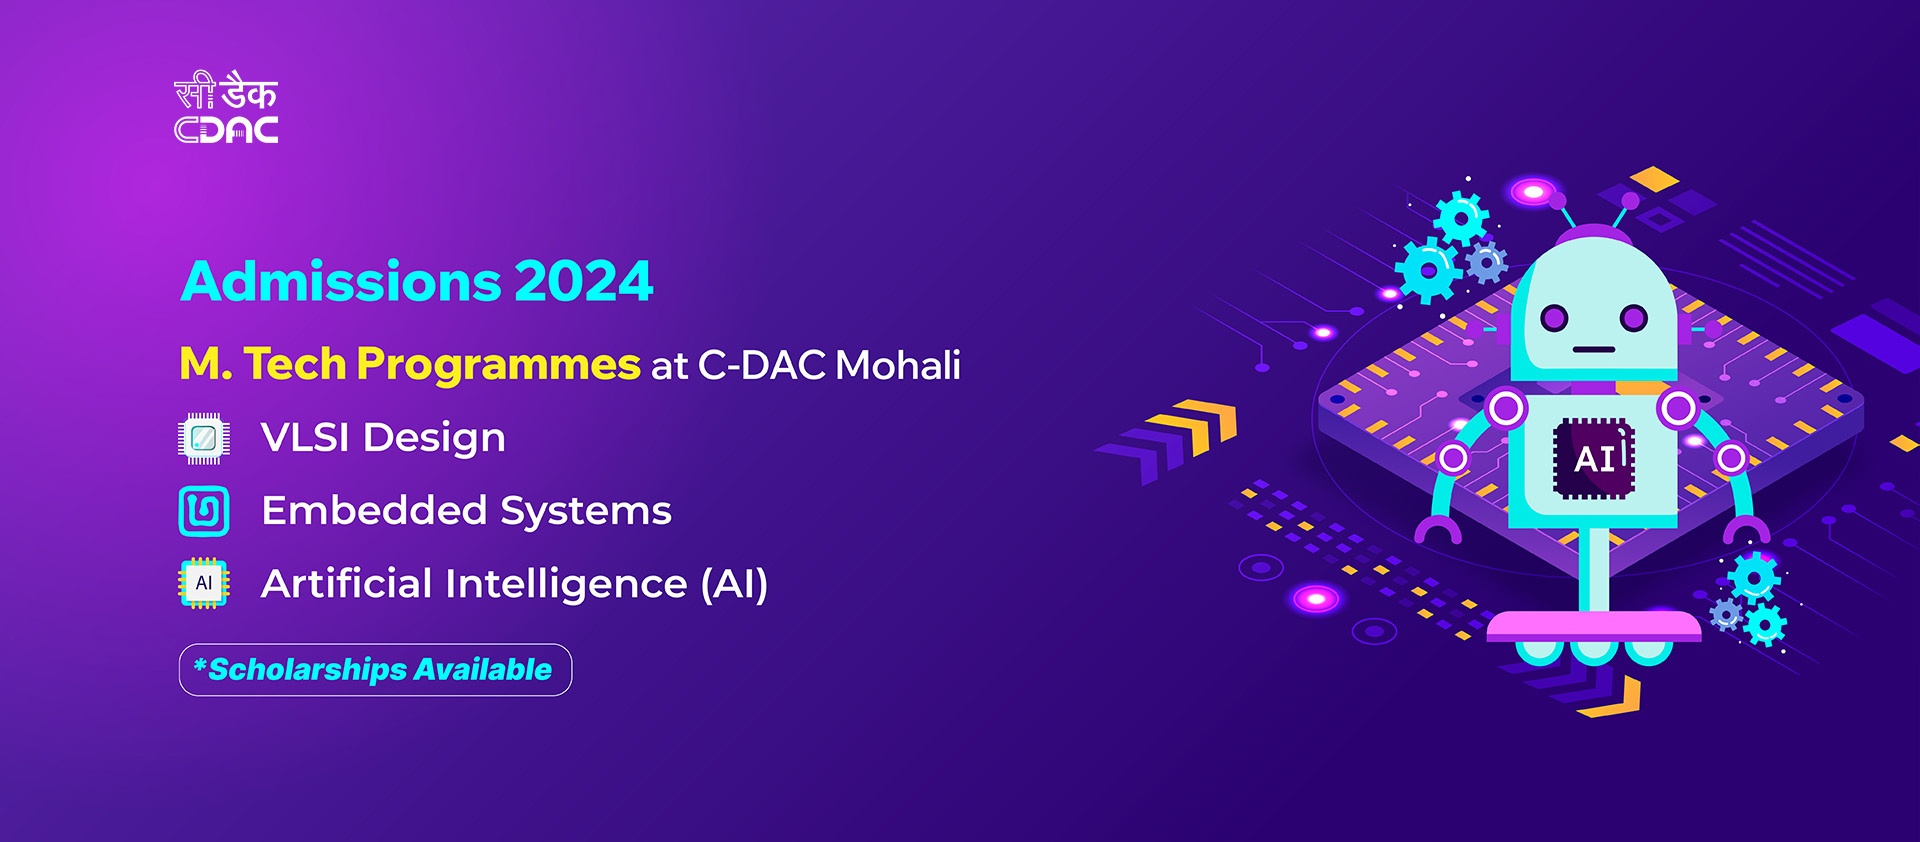 Admissions 2024 M. Tech Programmes at C-DAC Mohali